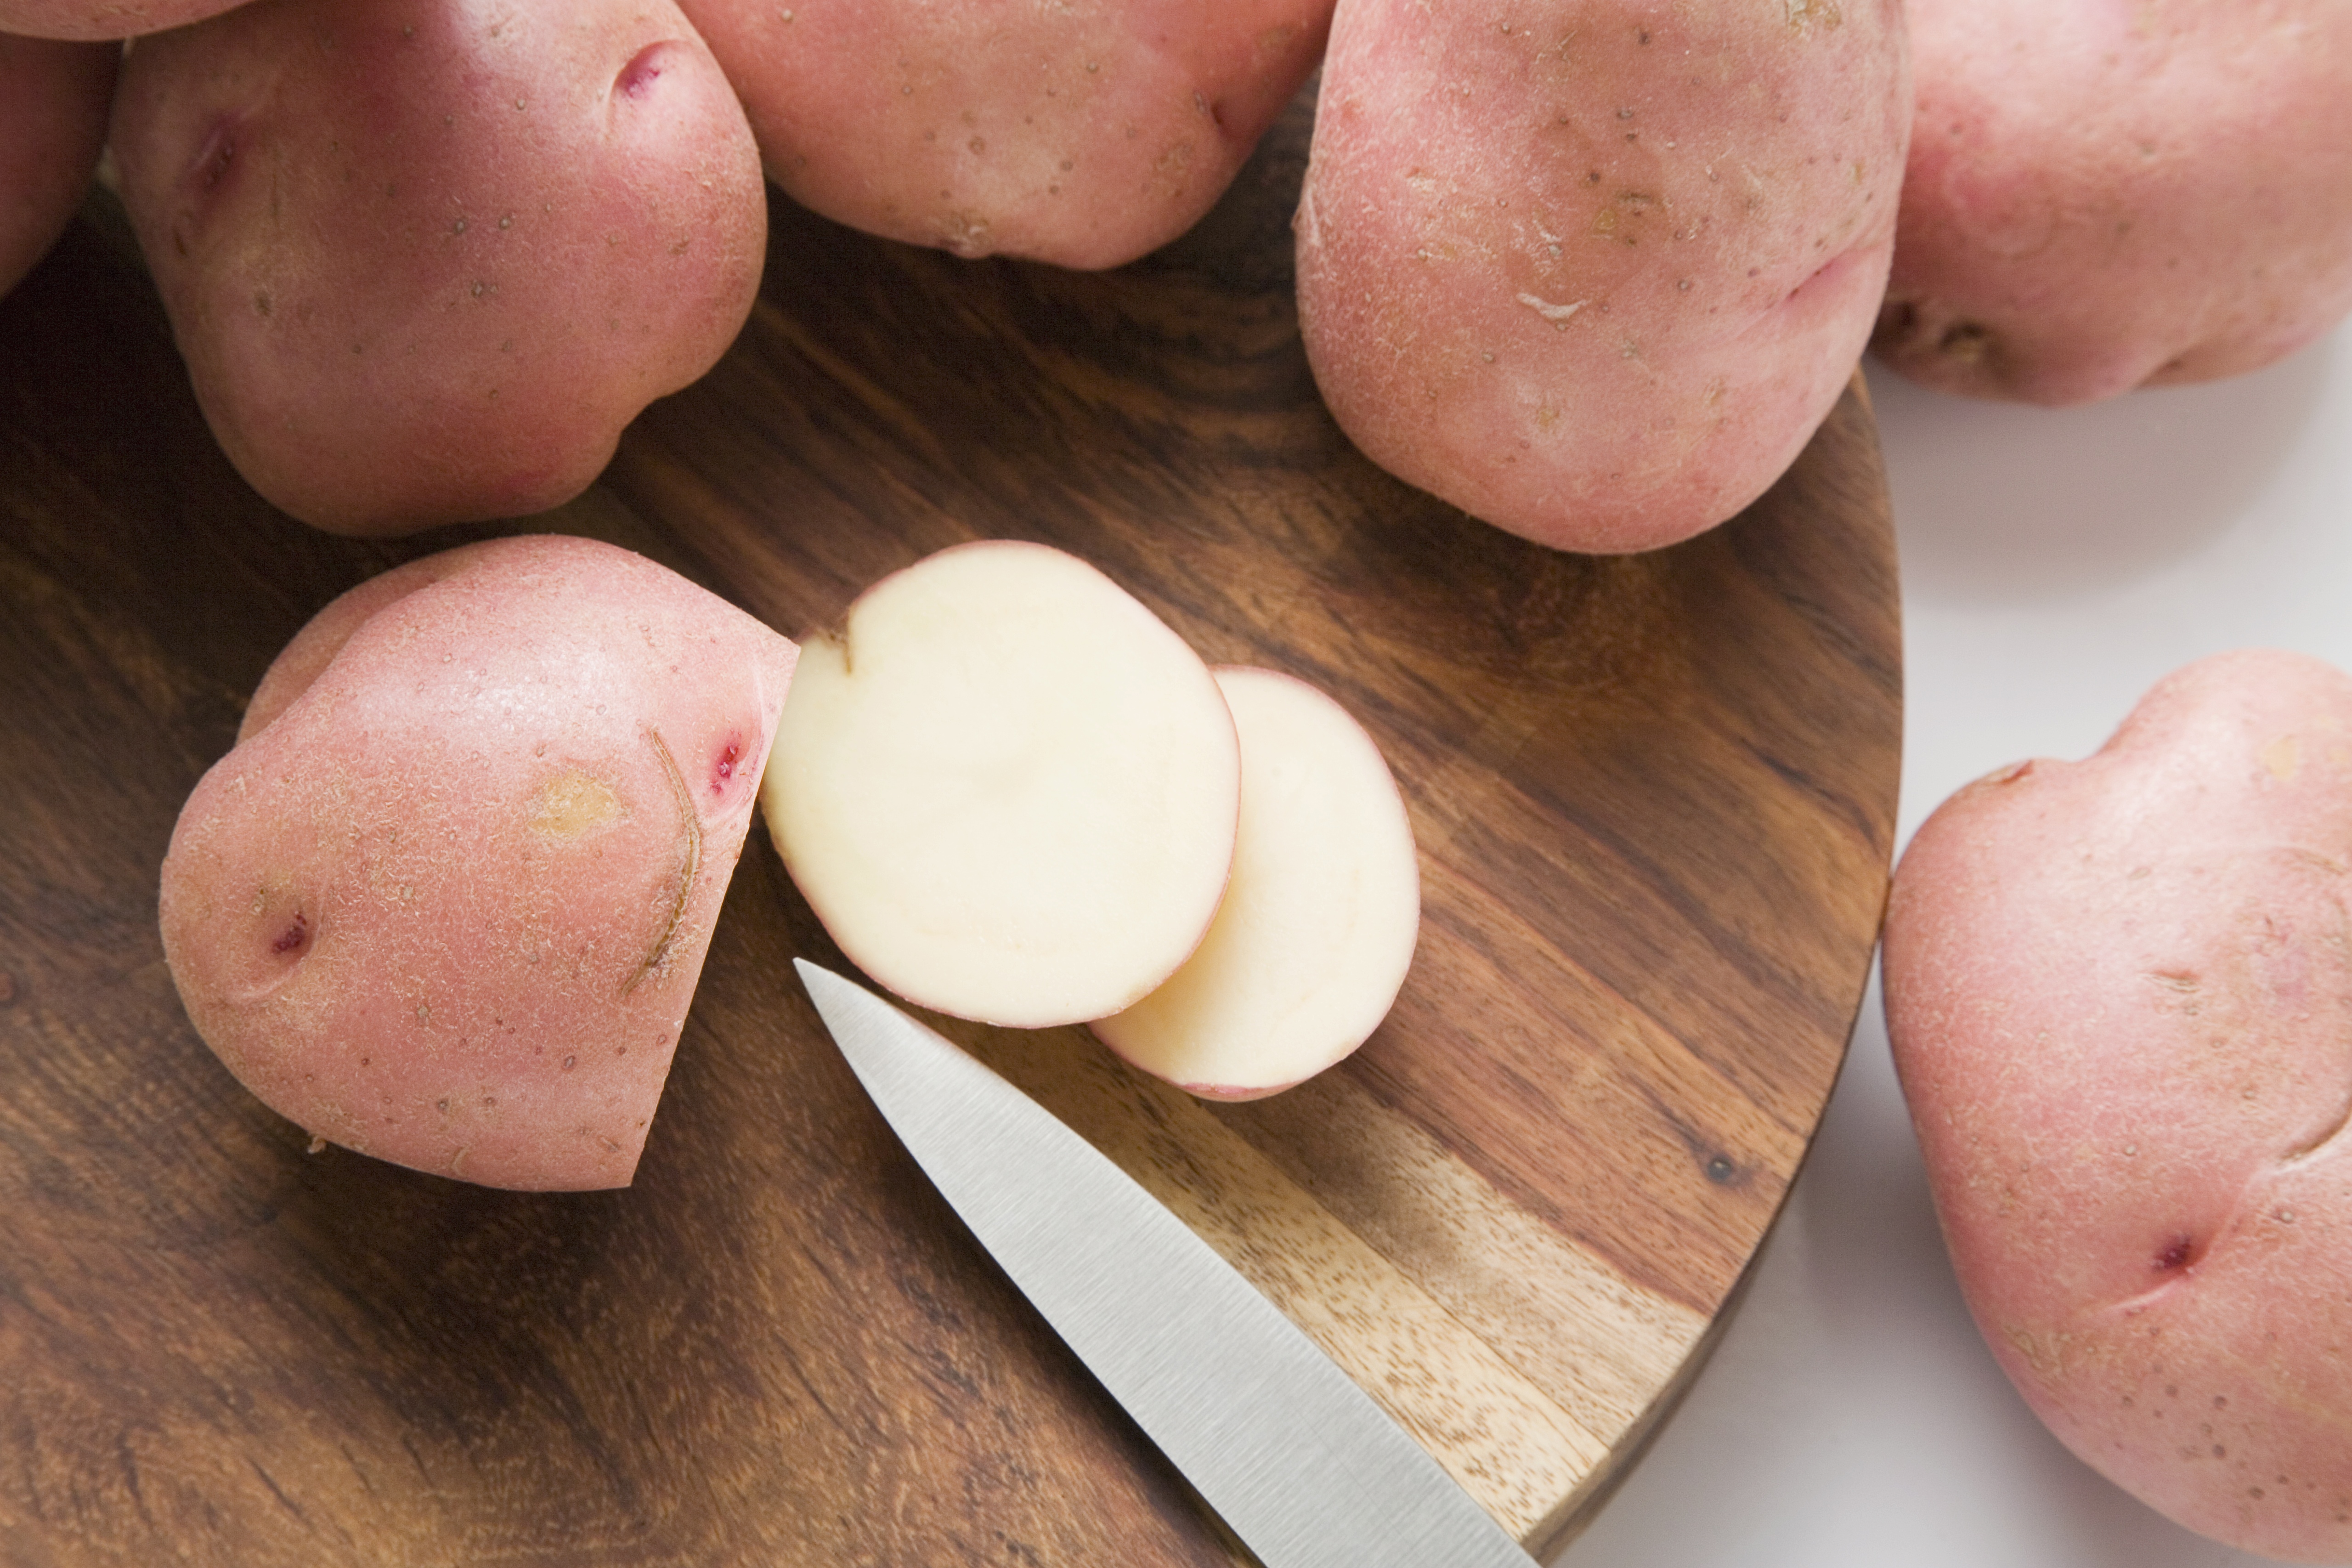 Are White Potatoes Considered Part of a Healthy Diet?